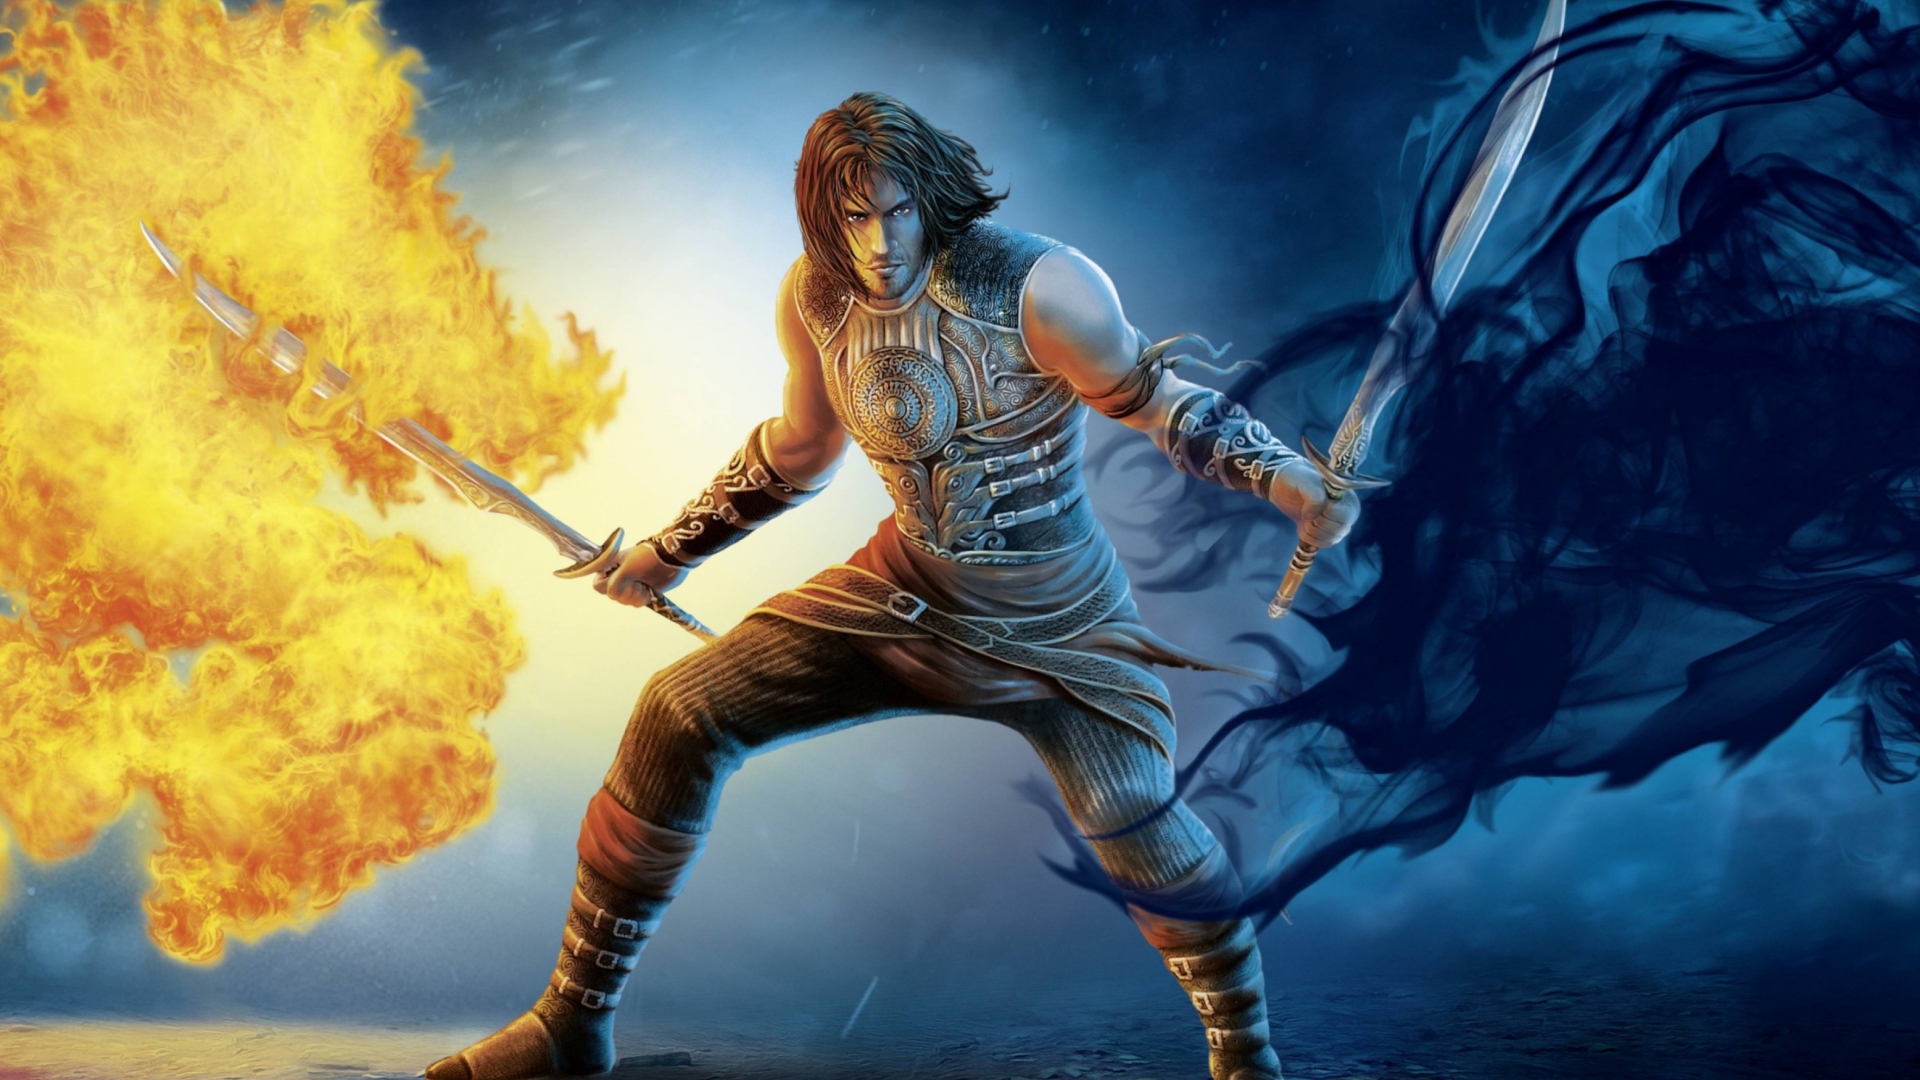 Prince Of Persia 2 Shadow And Flame wallpaper 1920x1080